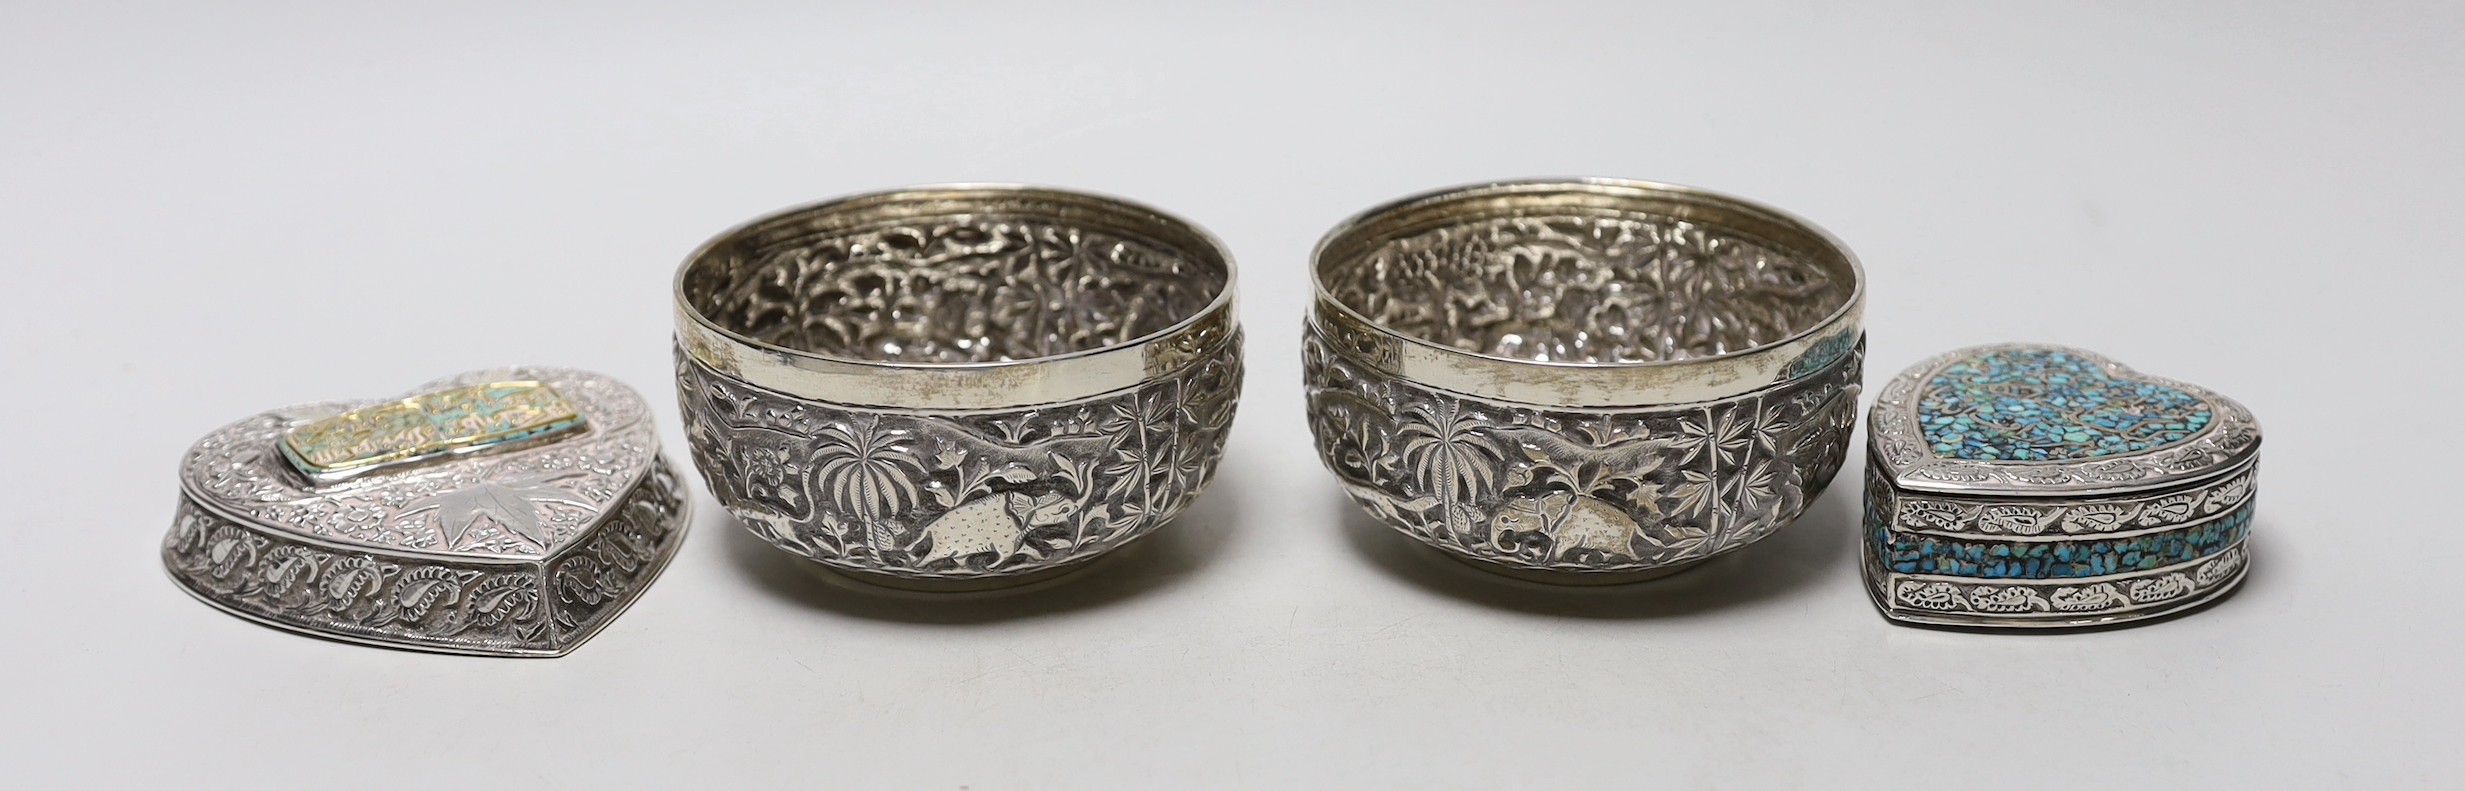 A pair of Indian embossed white metal finger bowls, diameter 97mm , a Persian white metal and turquoise set heart shaped paperweight and an Indian white metal and turquoise set heart shaped box.